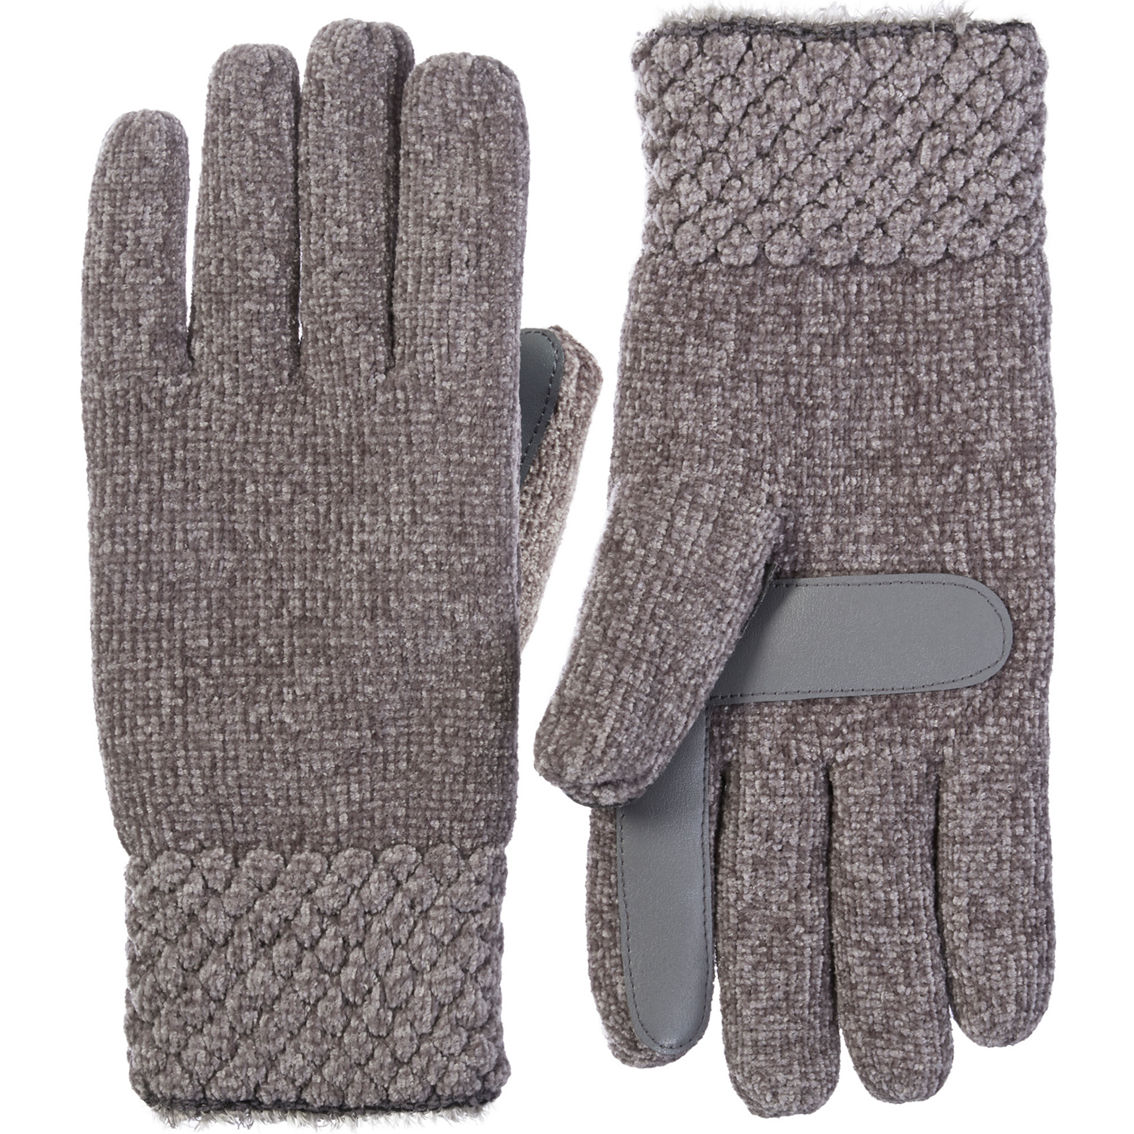 Isotoner Chenille Gloves with Popcorn Knit Cuff and smarTouch - Image 2 of 2